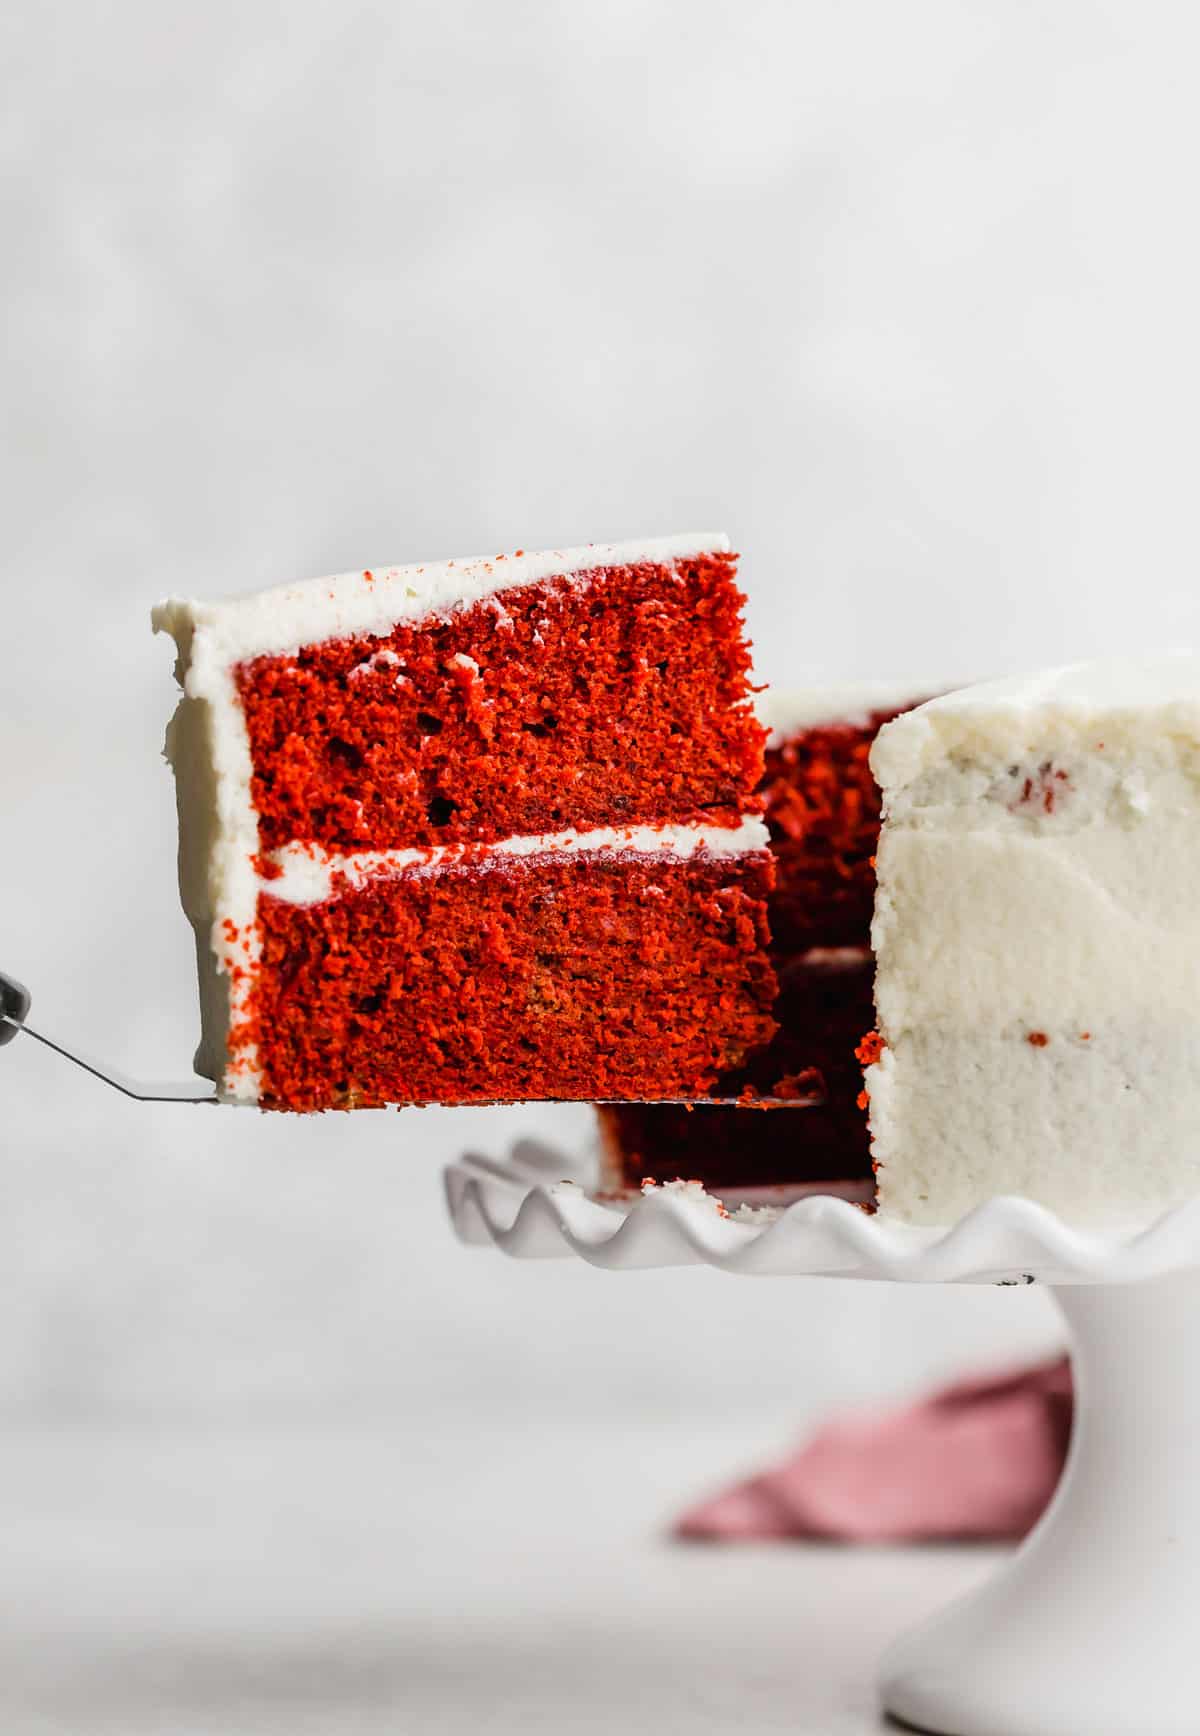 A slice of Old Fashioned Red Velvet Cake being lifted out of a white frosted cake.